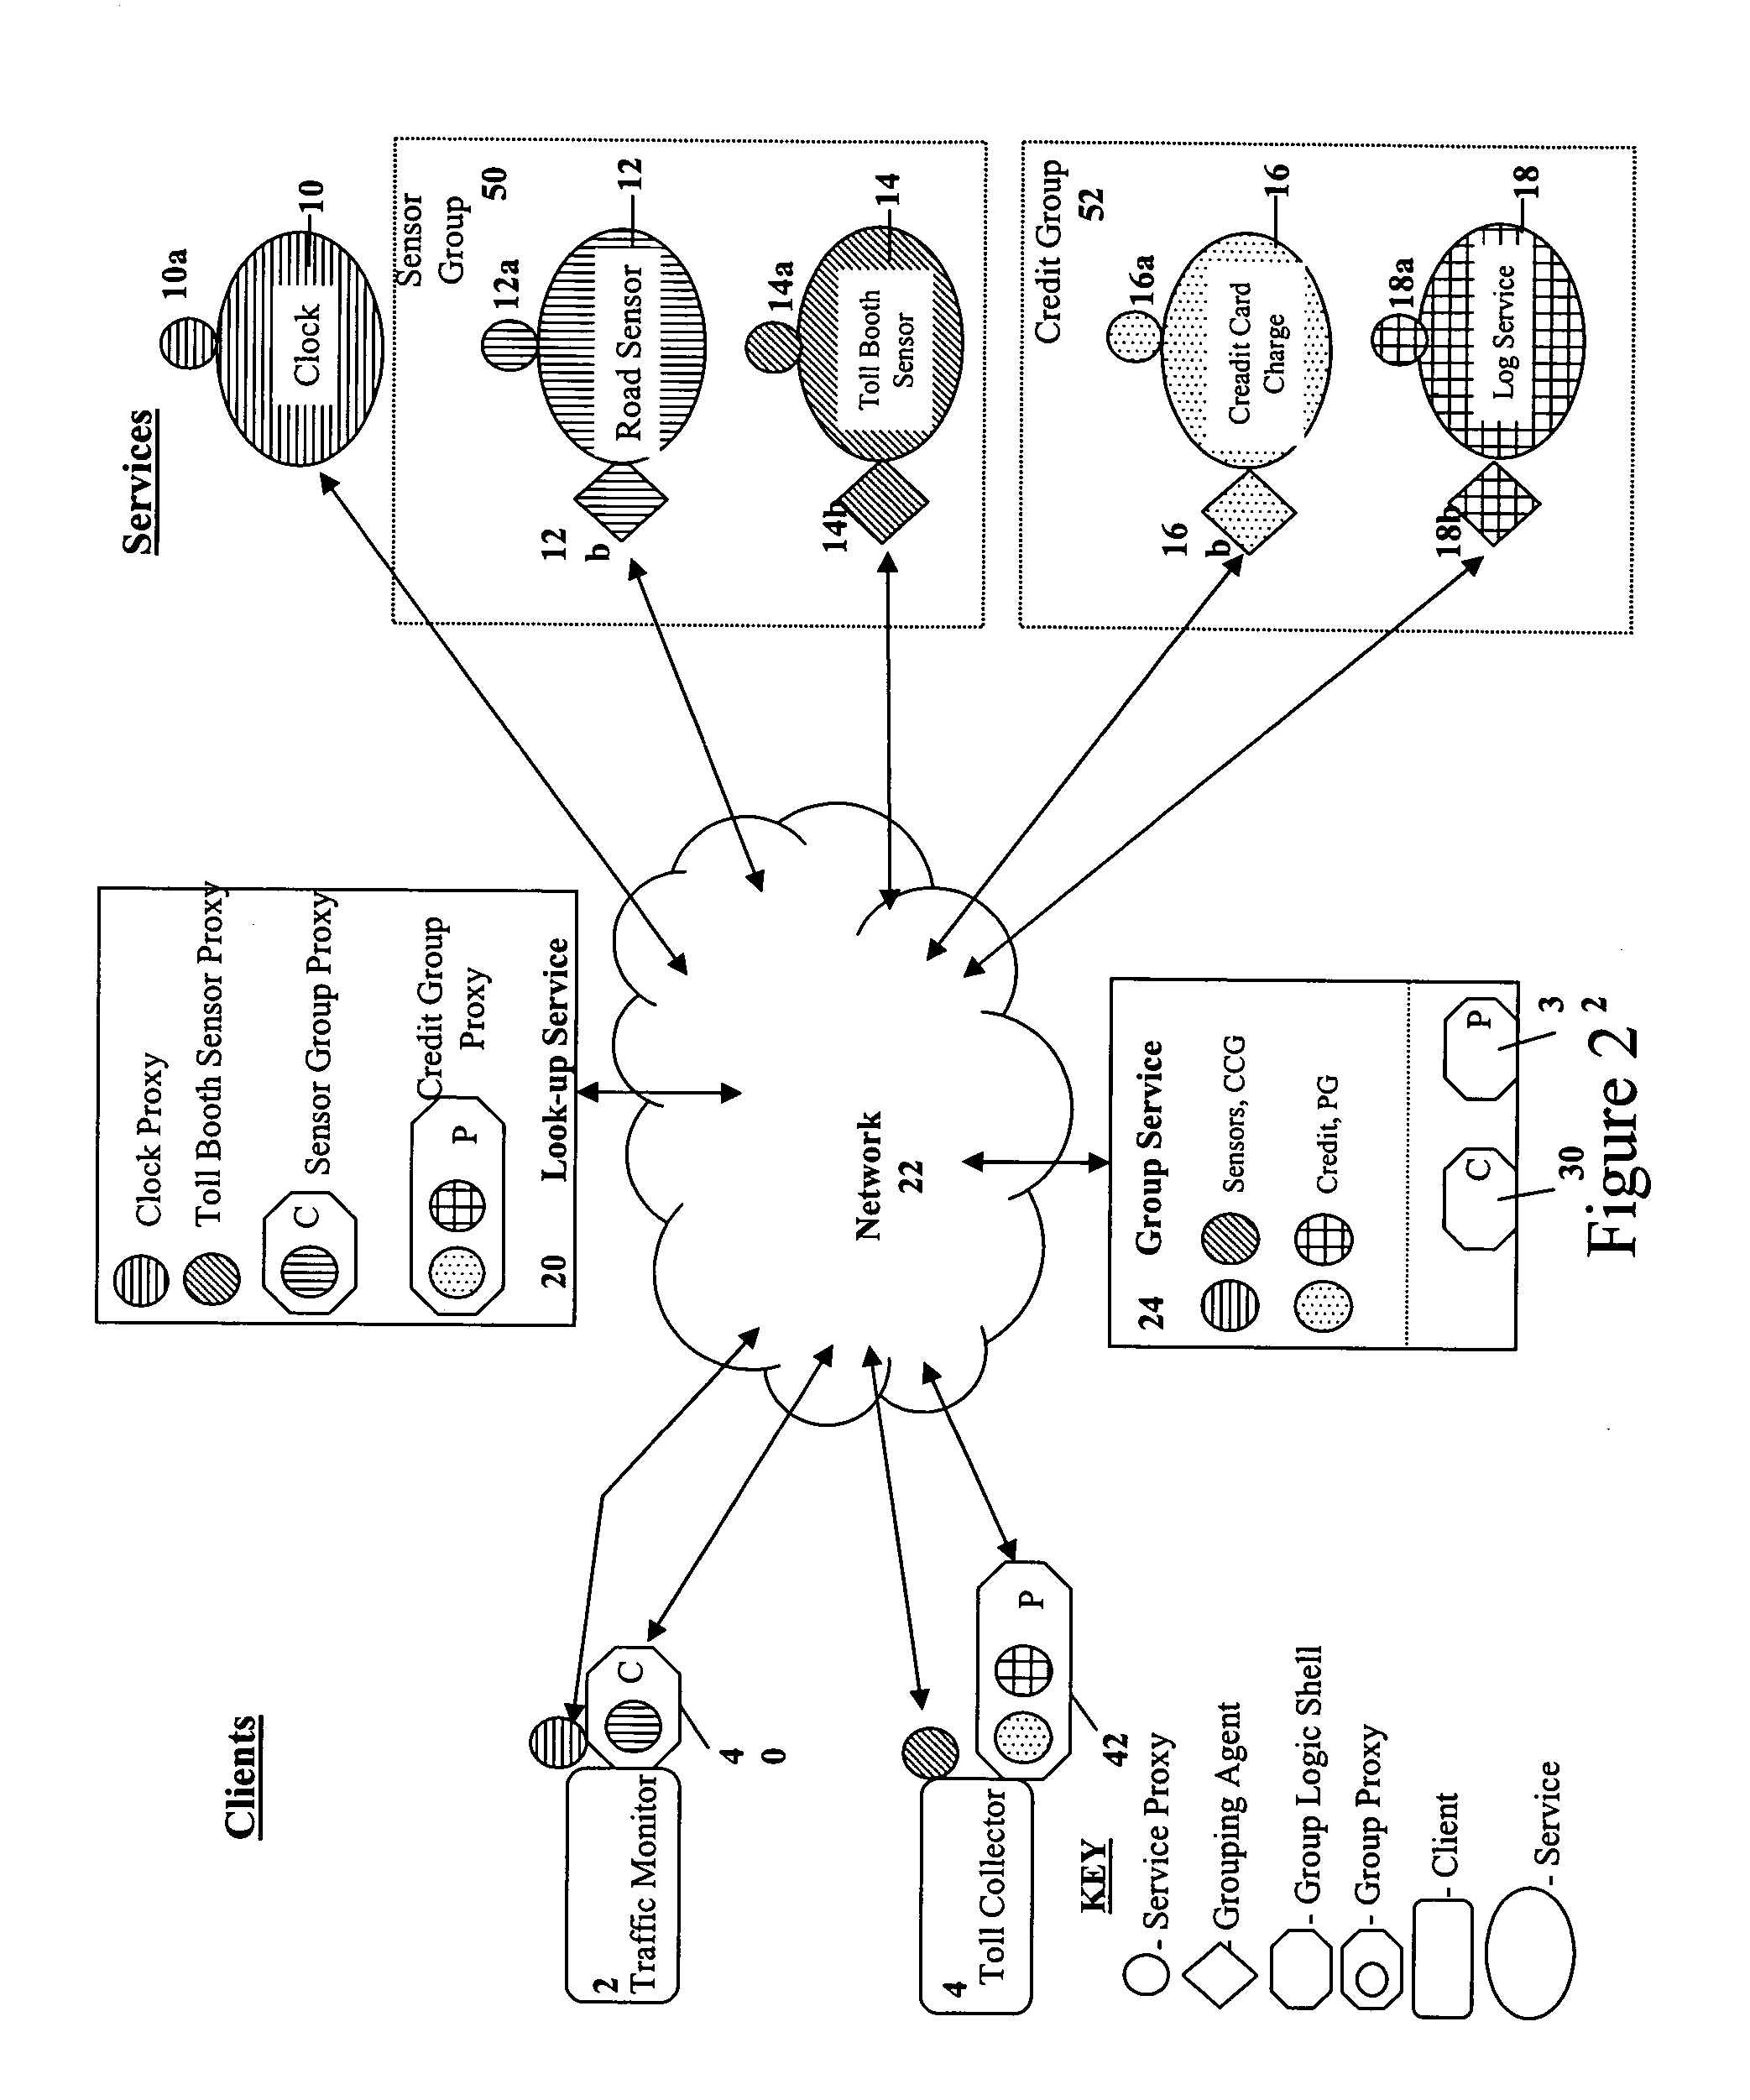 Method for a group of services to operate in two modes simultaneously